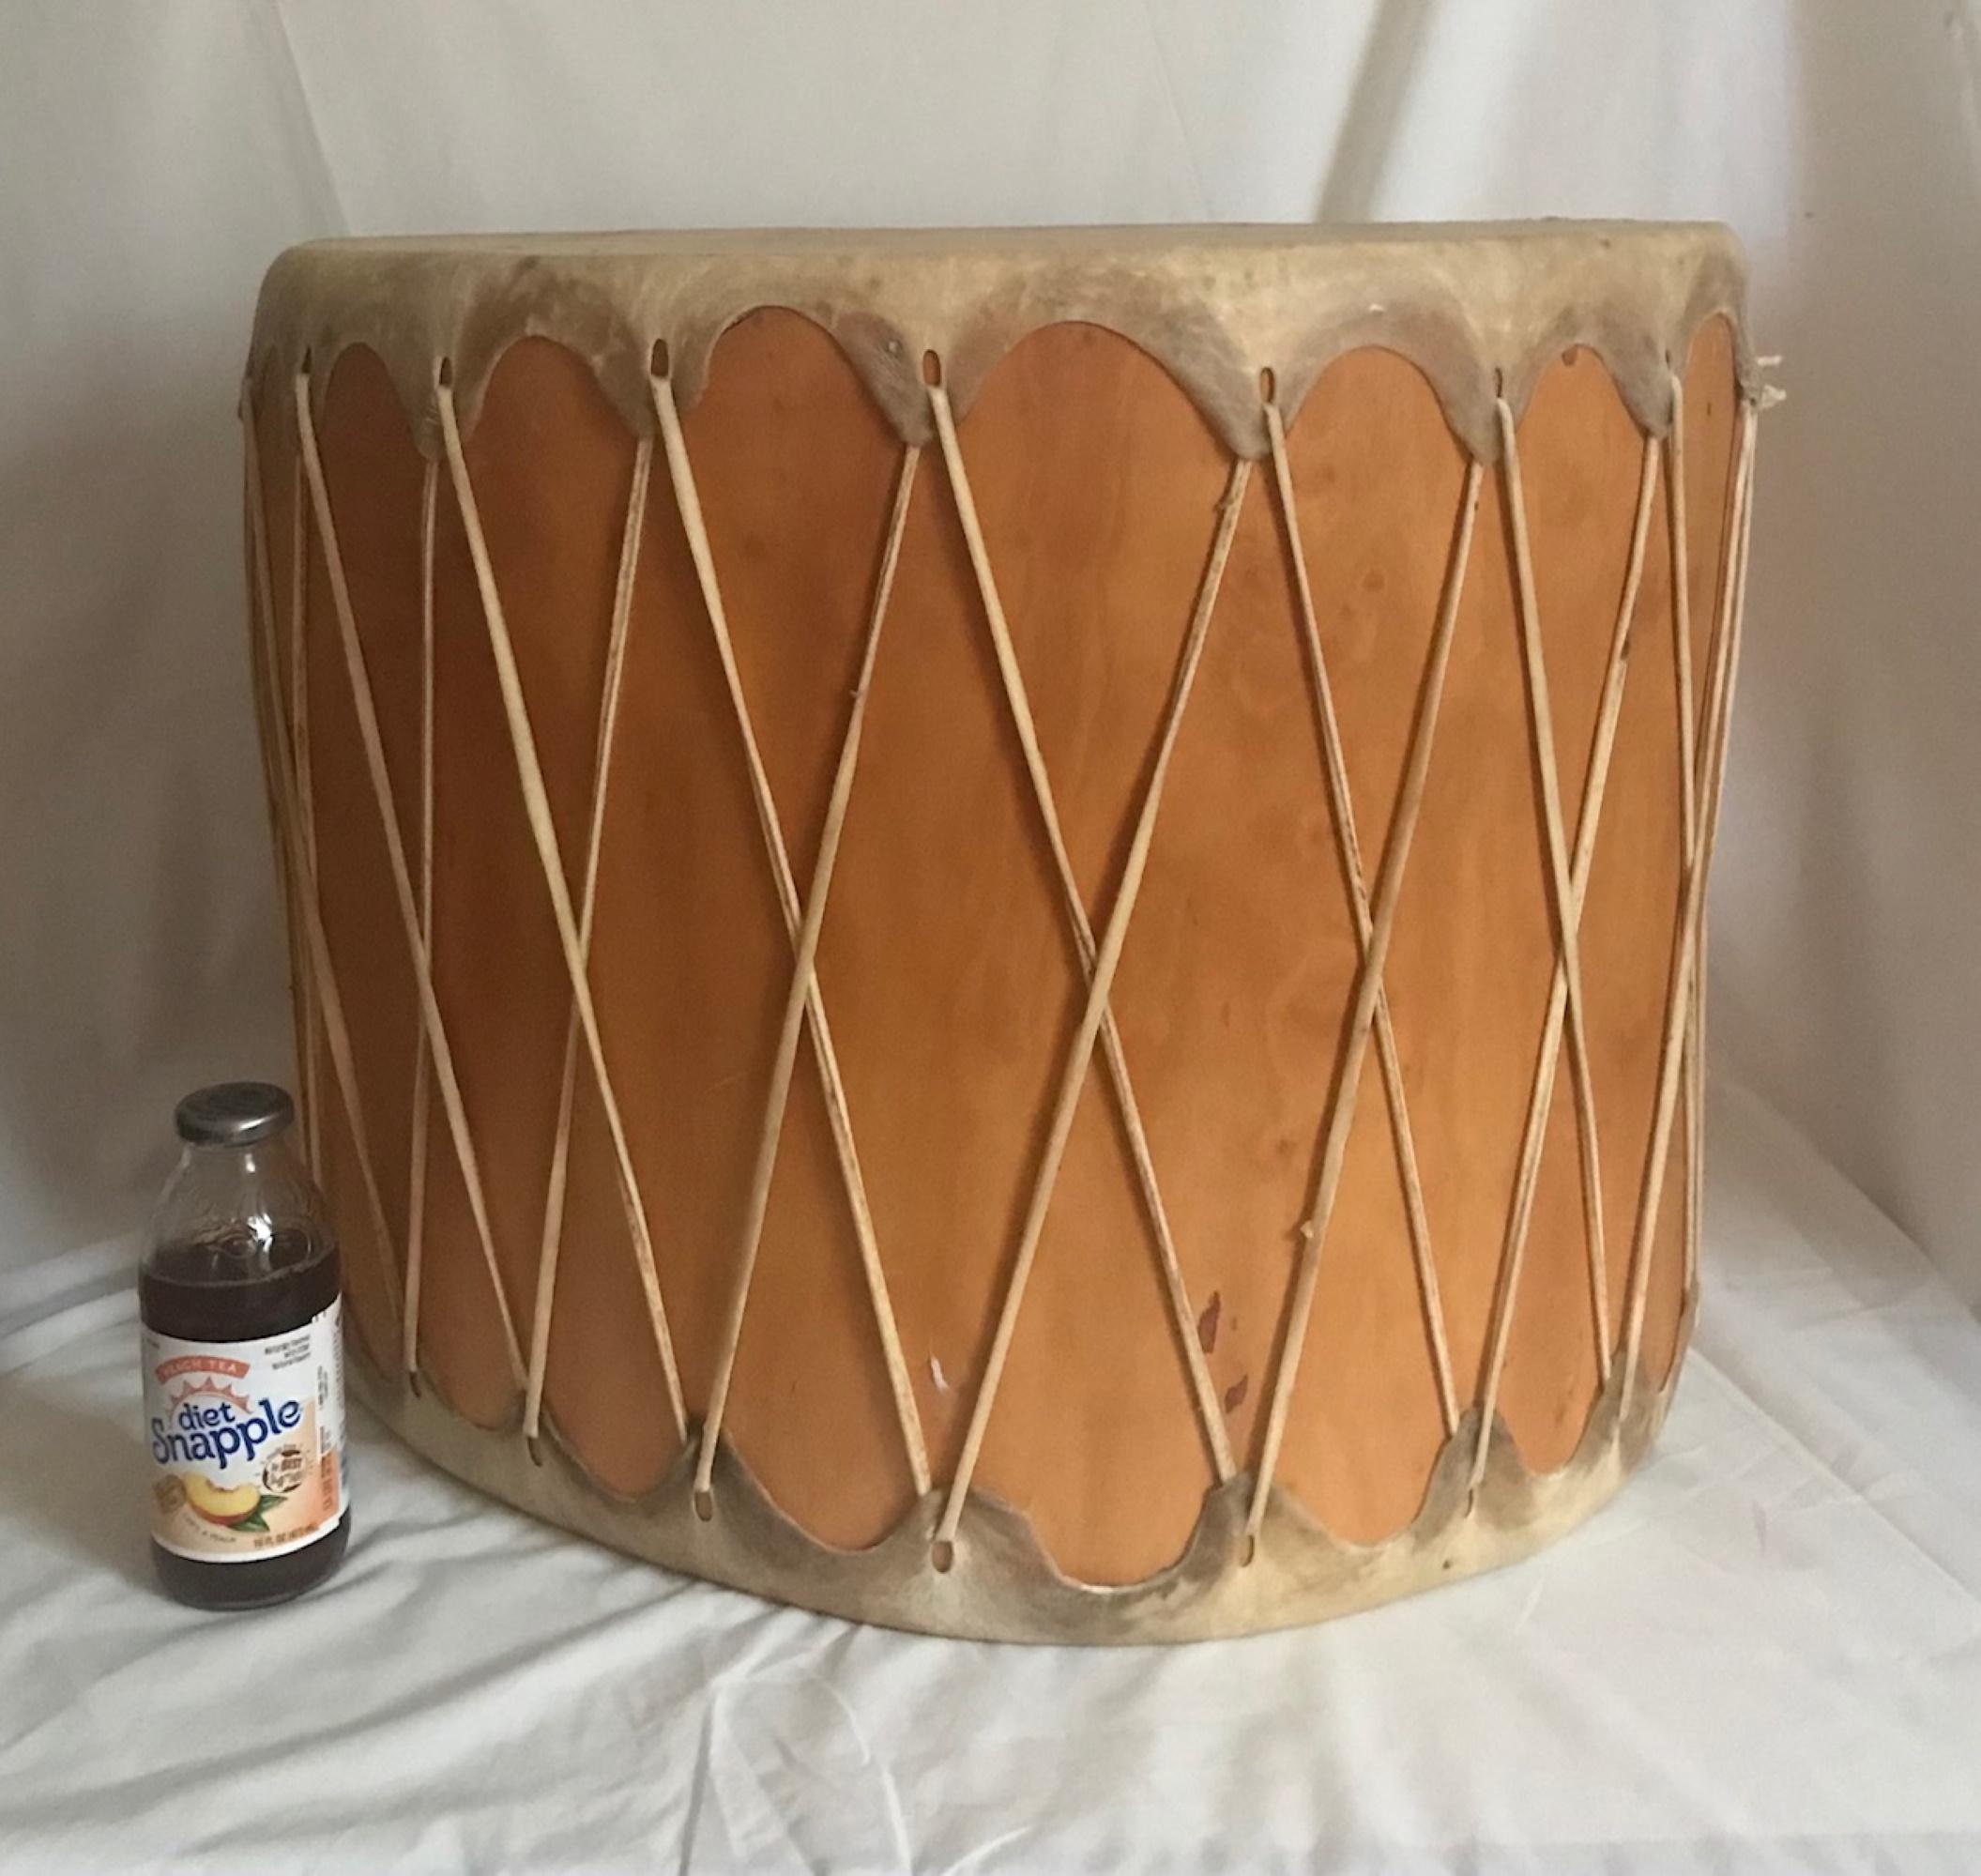 Huge vintage pueblo Native American double sided drum

This extra large drum is handmade by the Cochiti Pueblo people, a native tribe of New Mexico. It is exquisitely crafted from a hollowed single log of the cottonwood tree. The rawhide is